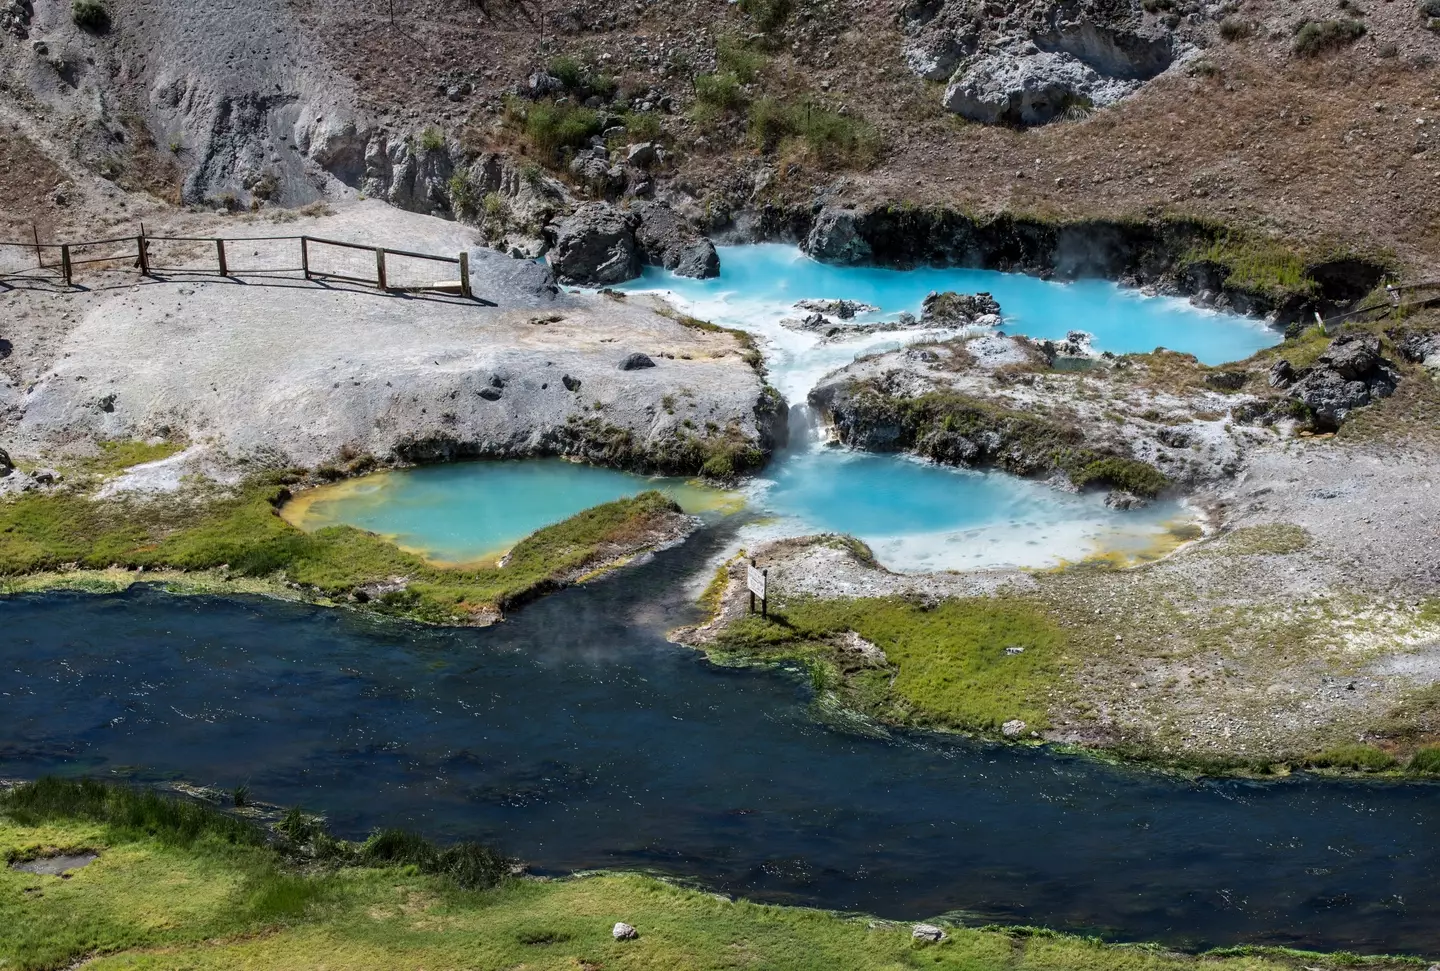 Photograph of a scalding hot pool of mineral water along the Long Valley caldera.